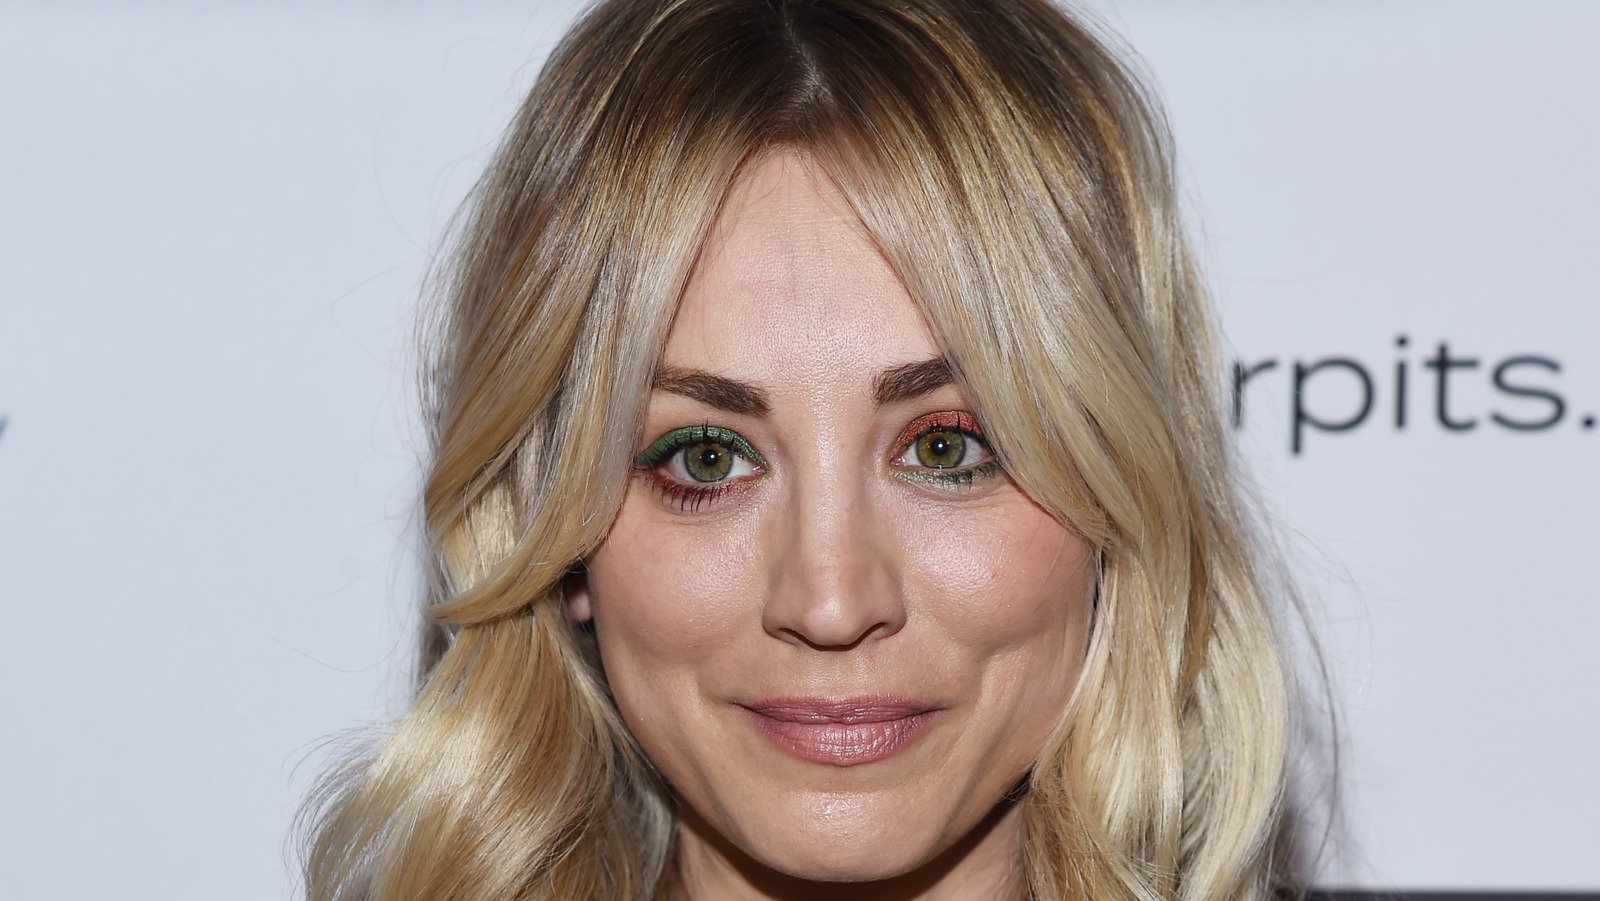 The Truth About Kaley Cuoco And Plastic Surgery